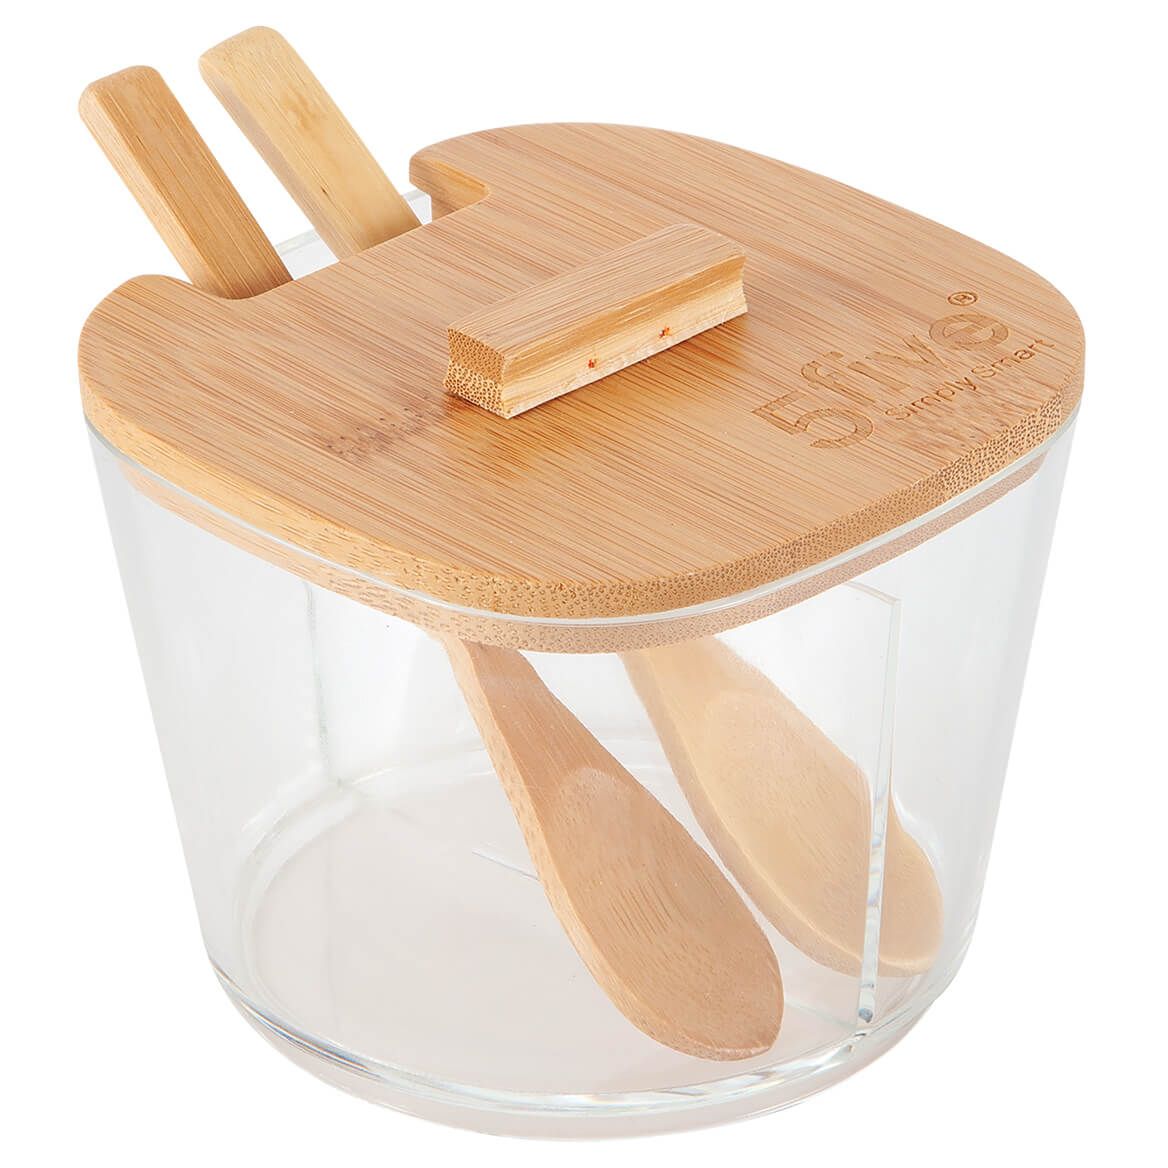 Seasoning Storage Container with Spoons by HMP + '-' + 376847